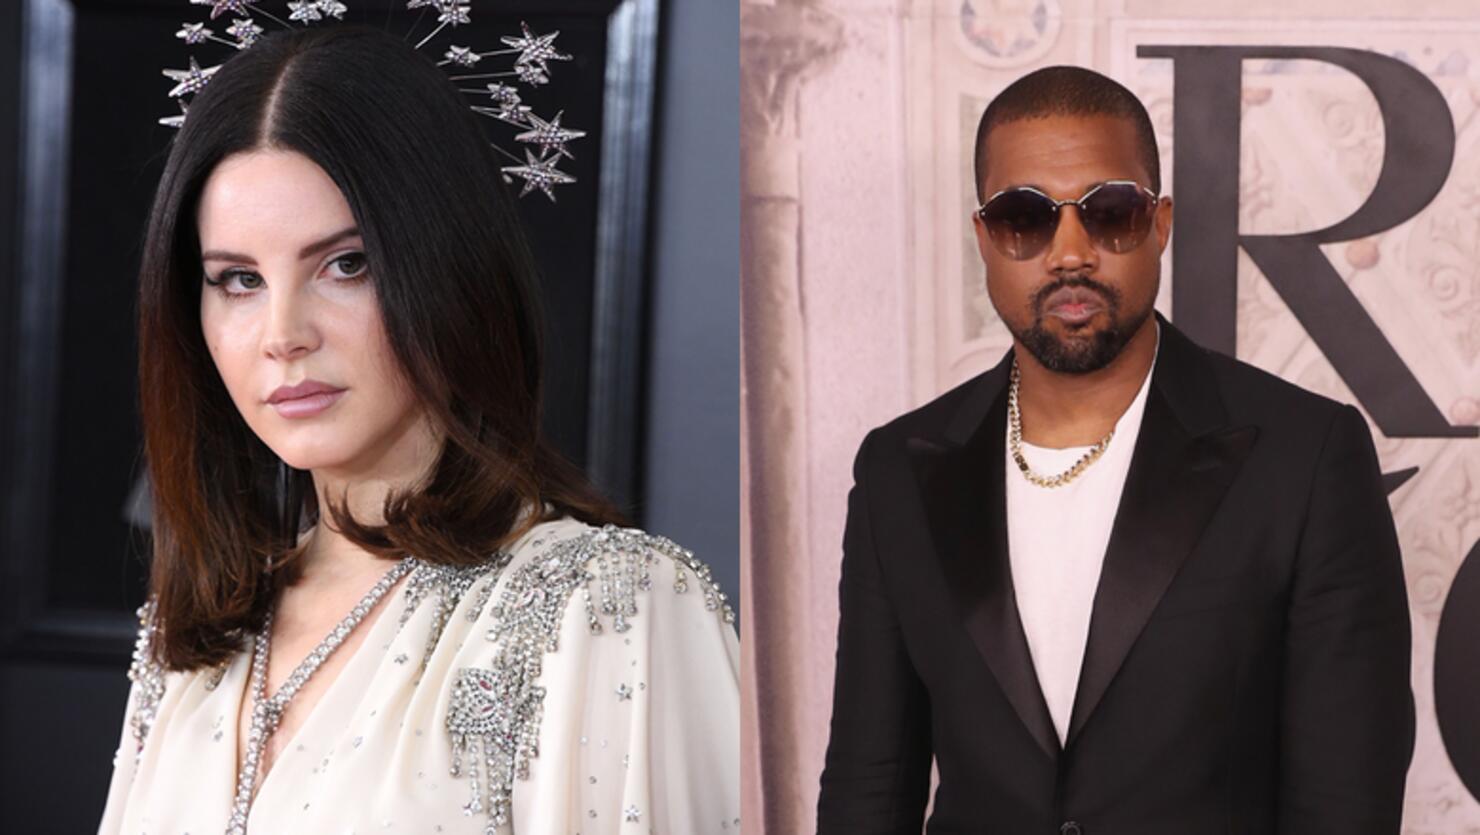 Lana Del Rey Pretty Much Obliterates Kanye West Over Trump Support | iHeart